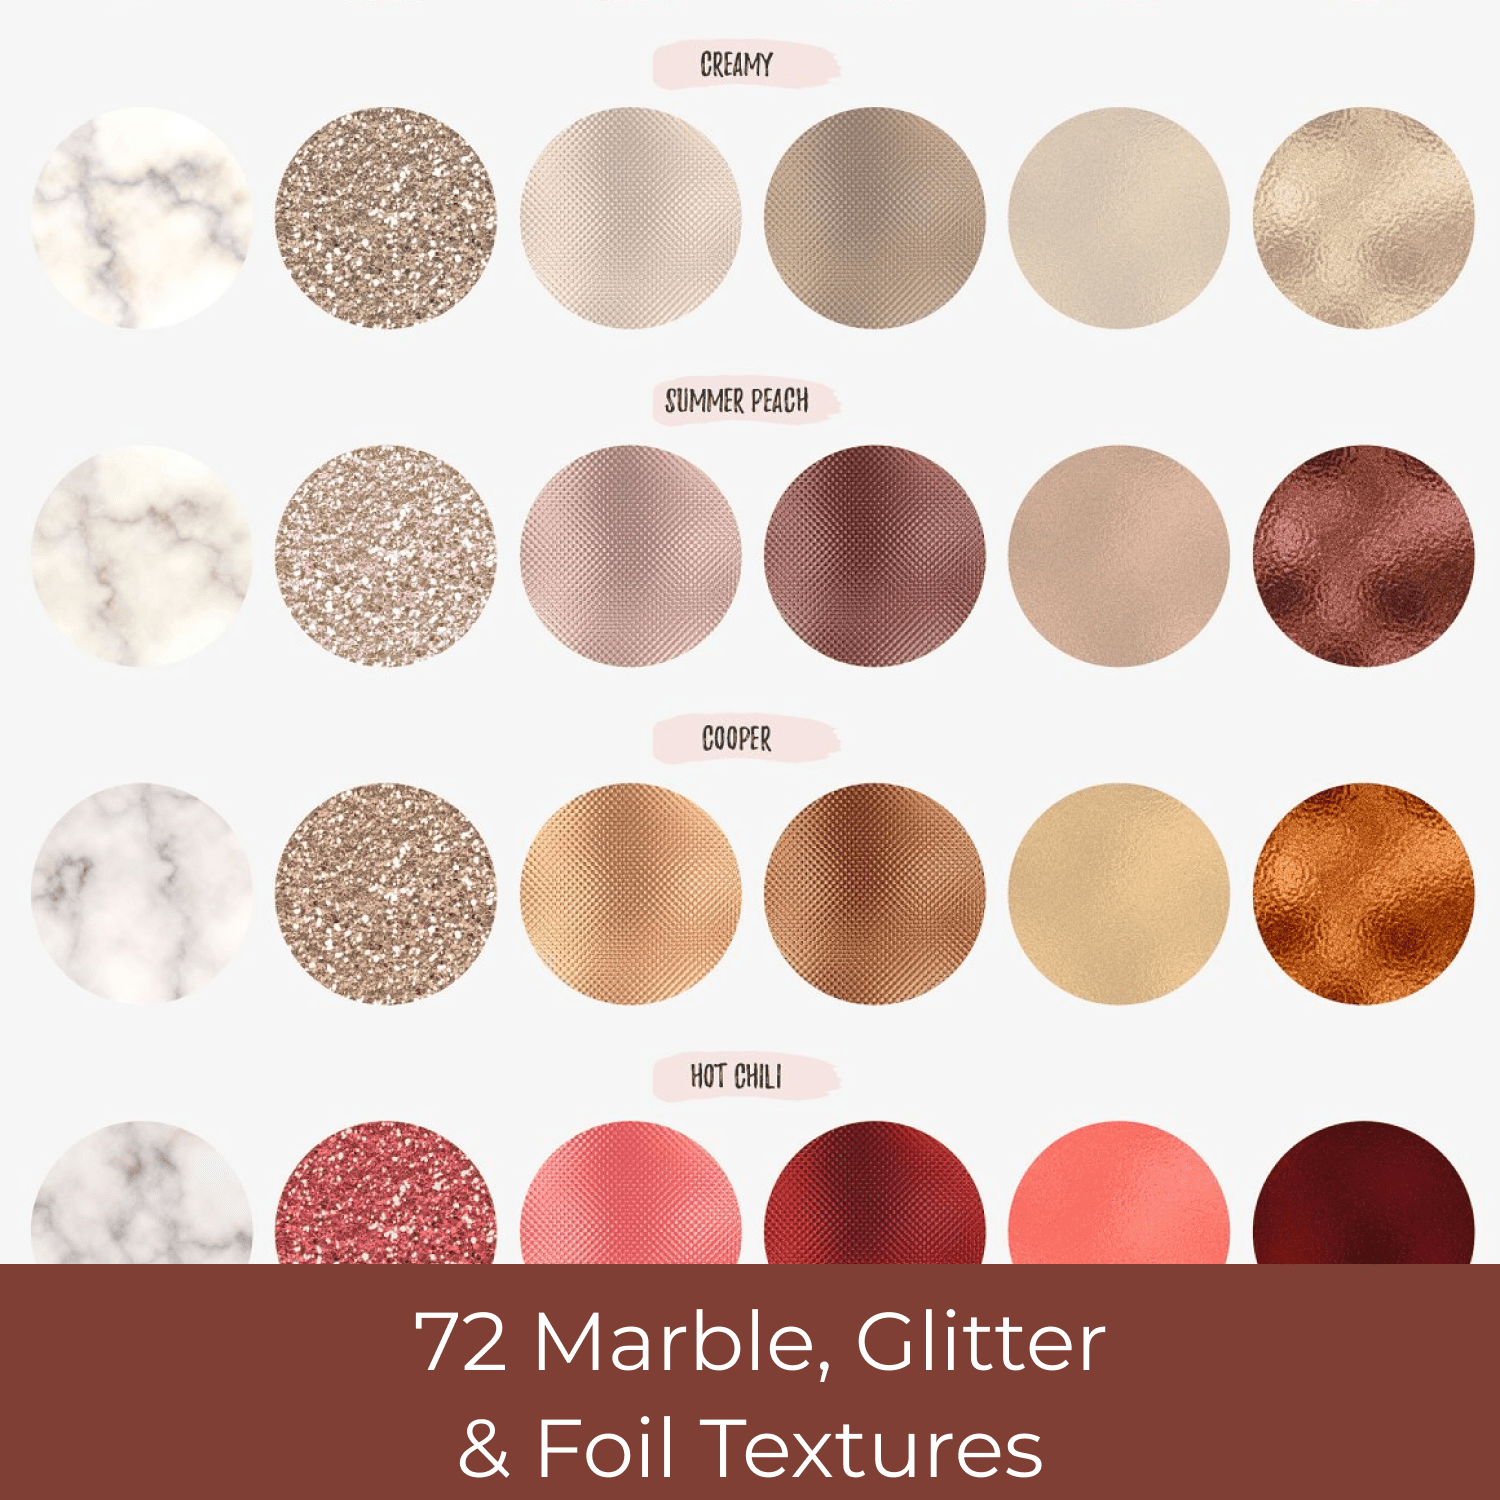 72 Marble, Glitter & Foil Textures cover.